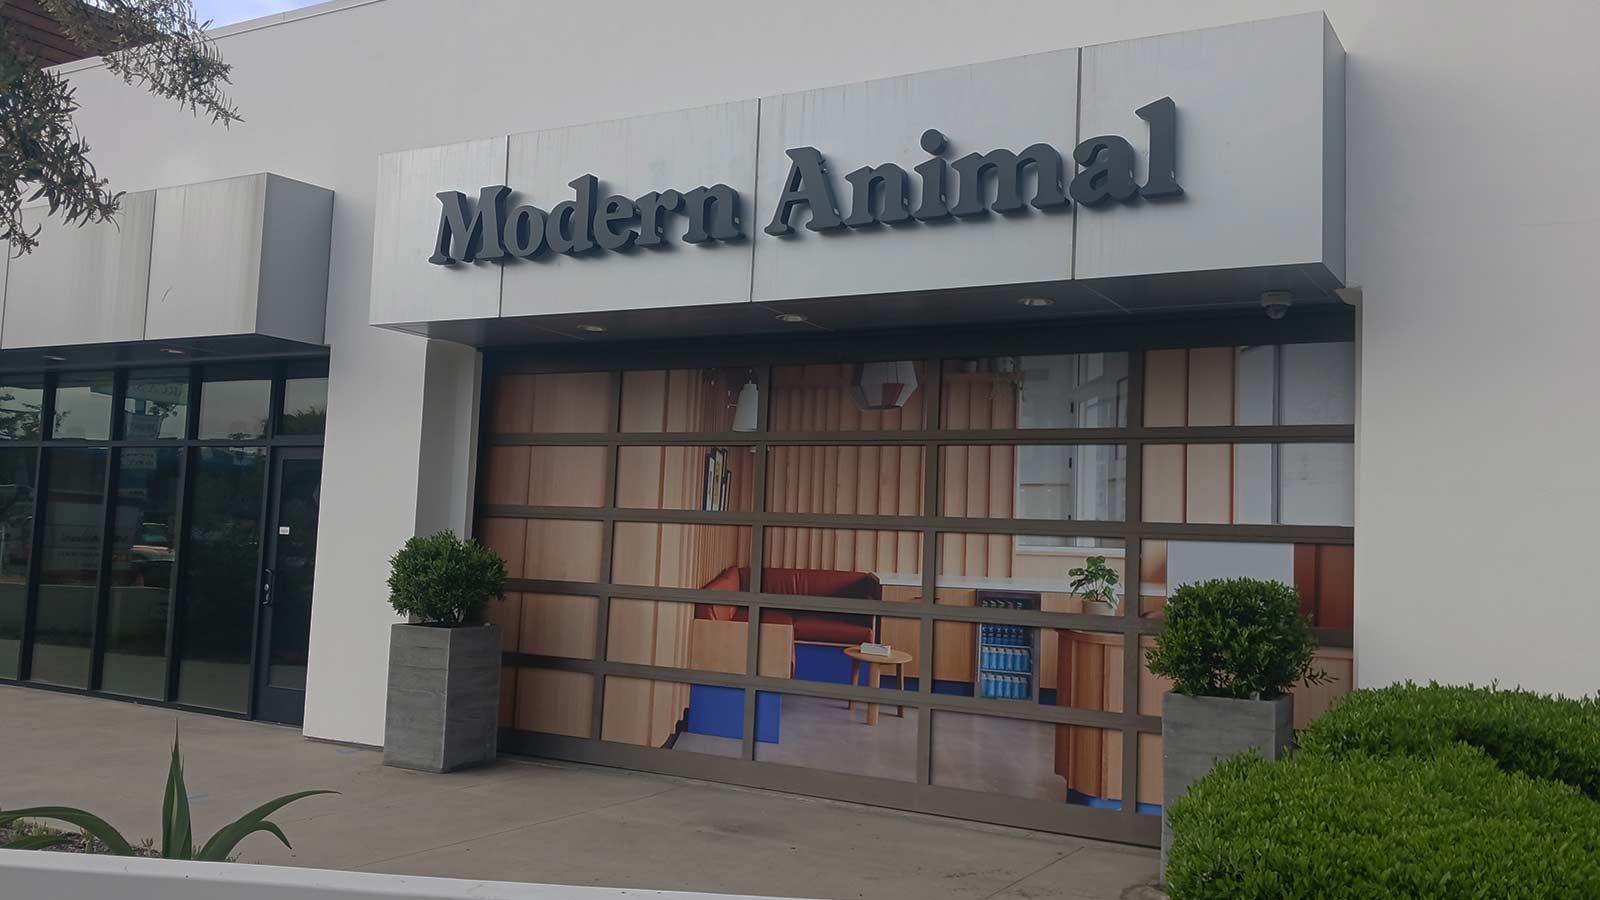 Modern Animal backlit letters mounted on the facade